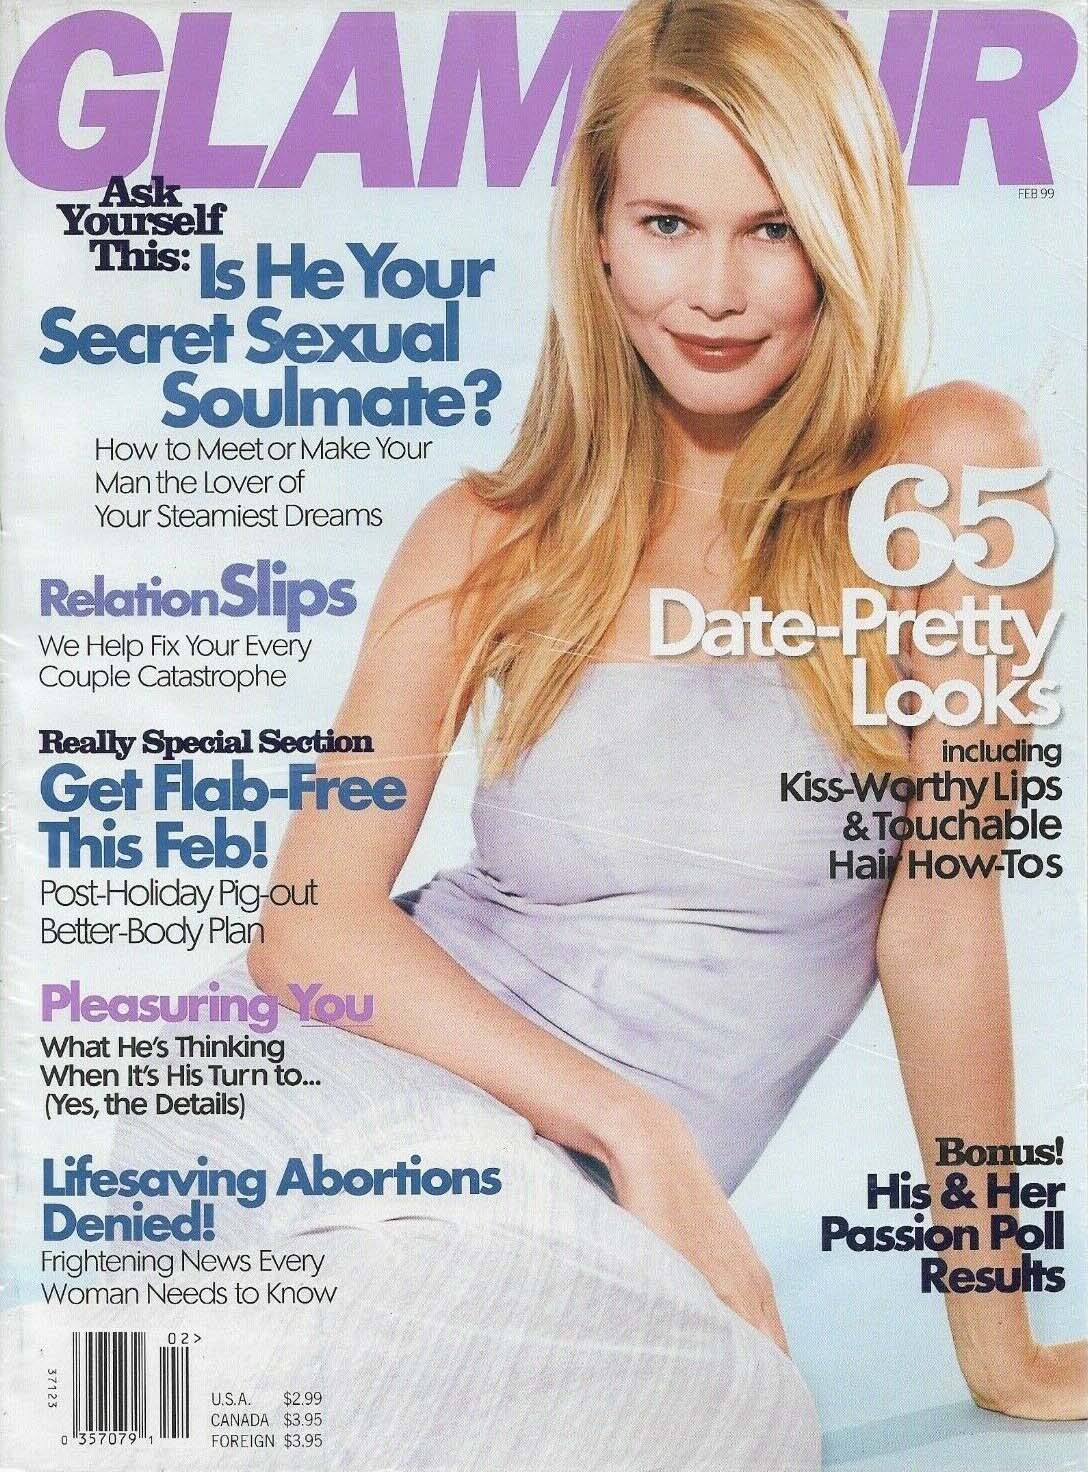 Glamour February 1999 magazine back issue Glamour magizine back copy Glamour February 1999 Womens Magazine Back Issue Published by Conde Nast Publications. Ask Yourself This: Is He Your Secret Sexual Soulmate?.